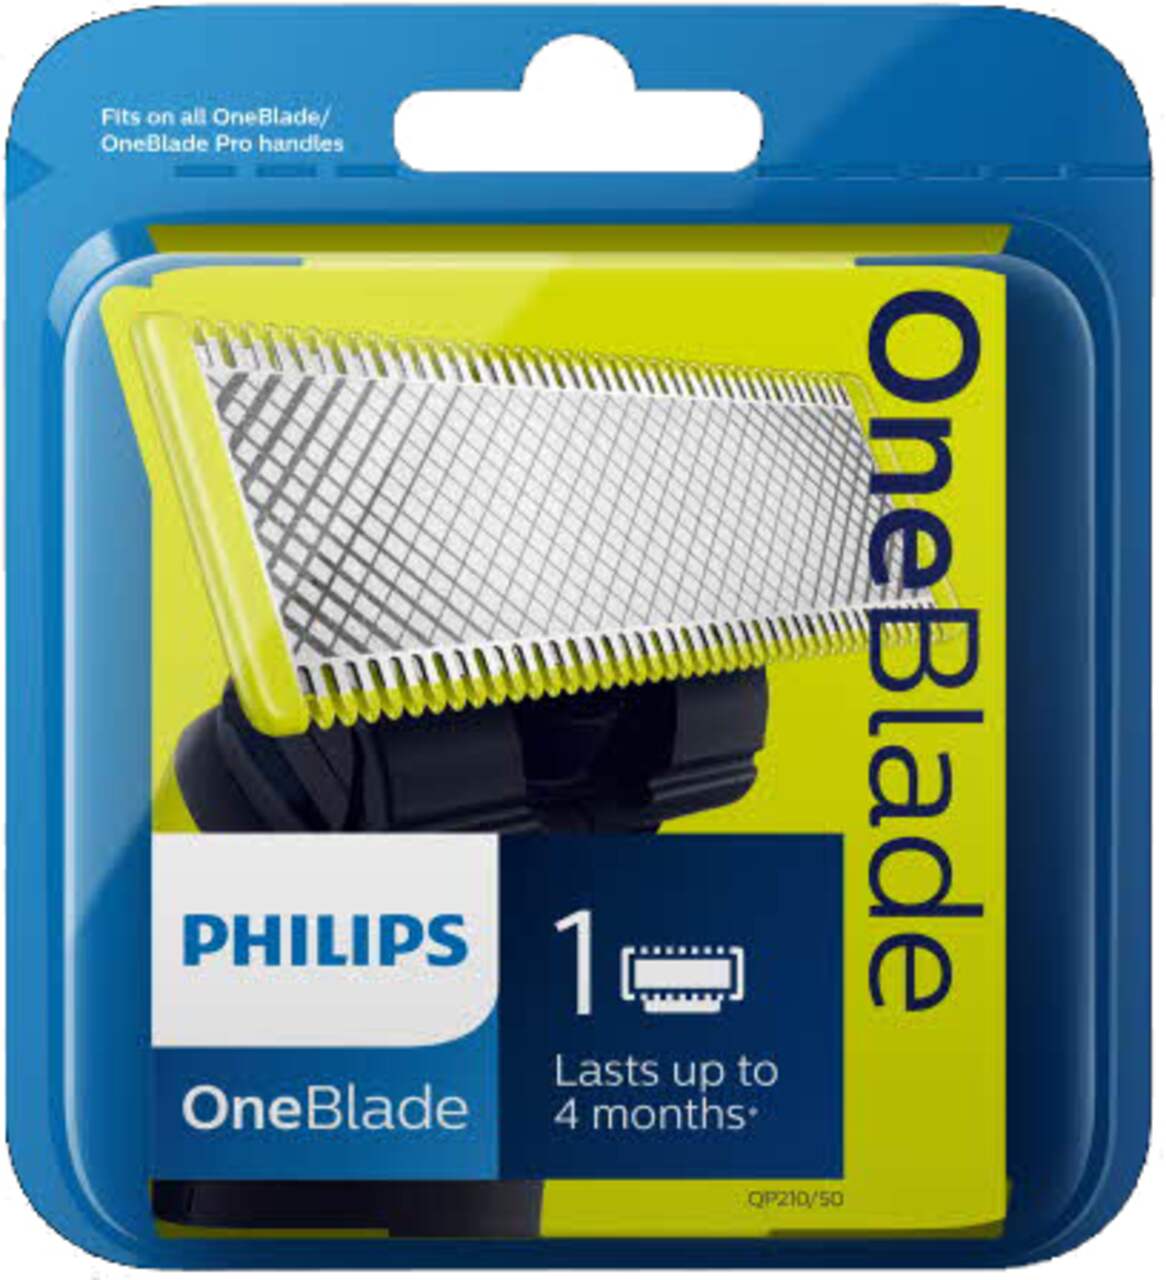 https://media-www.canadiantire.ca/product/living/personal-garment-care/personal-care/0439138/philips-oneblade-replacement-head-1-pack-90c1636a-5e22-4a58-b67b-8debb429c77d.png?imdensity=1&imwidth=640&impolicy=mZoom